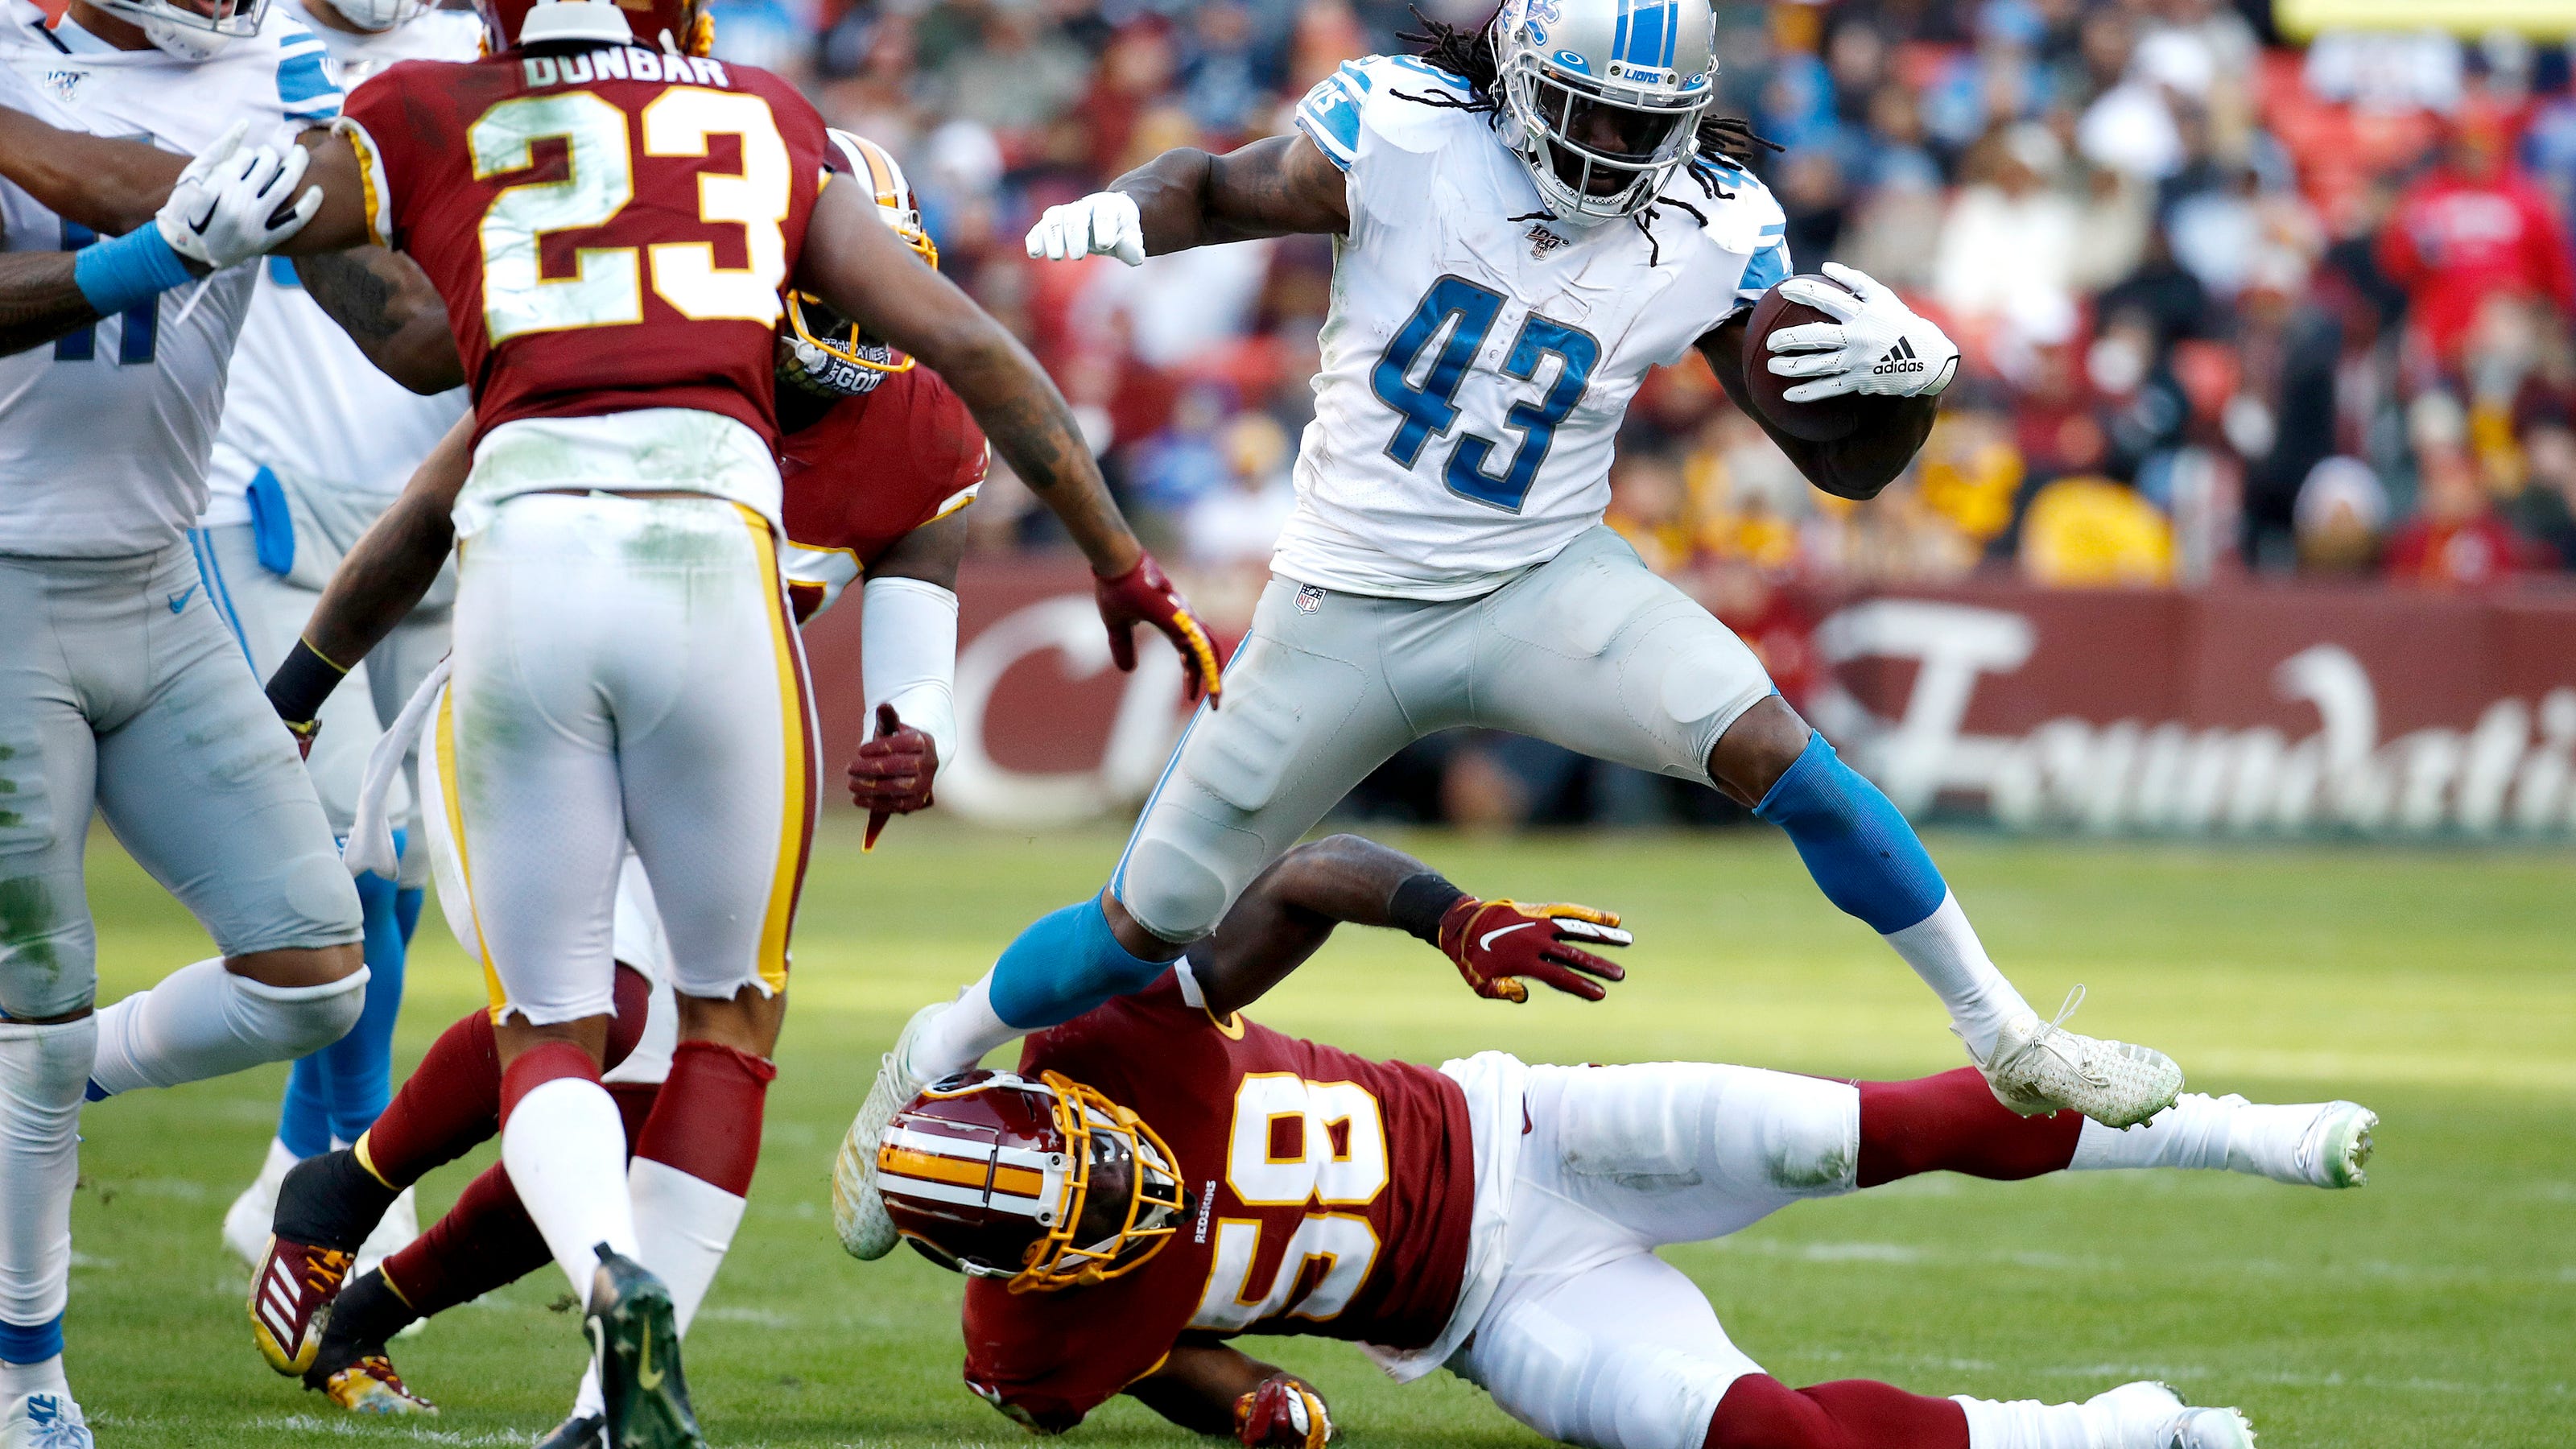 Lions sank to additional depths in loss to Washington